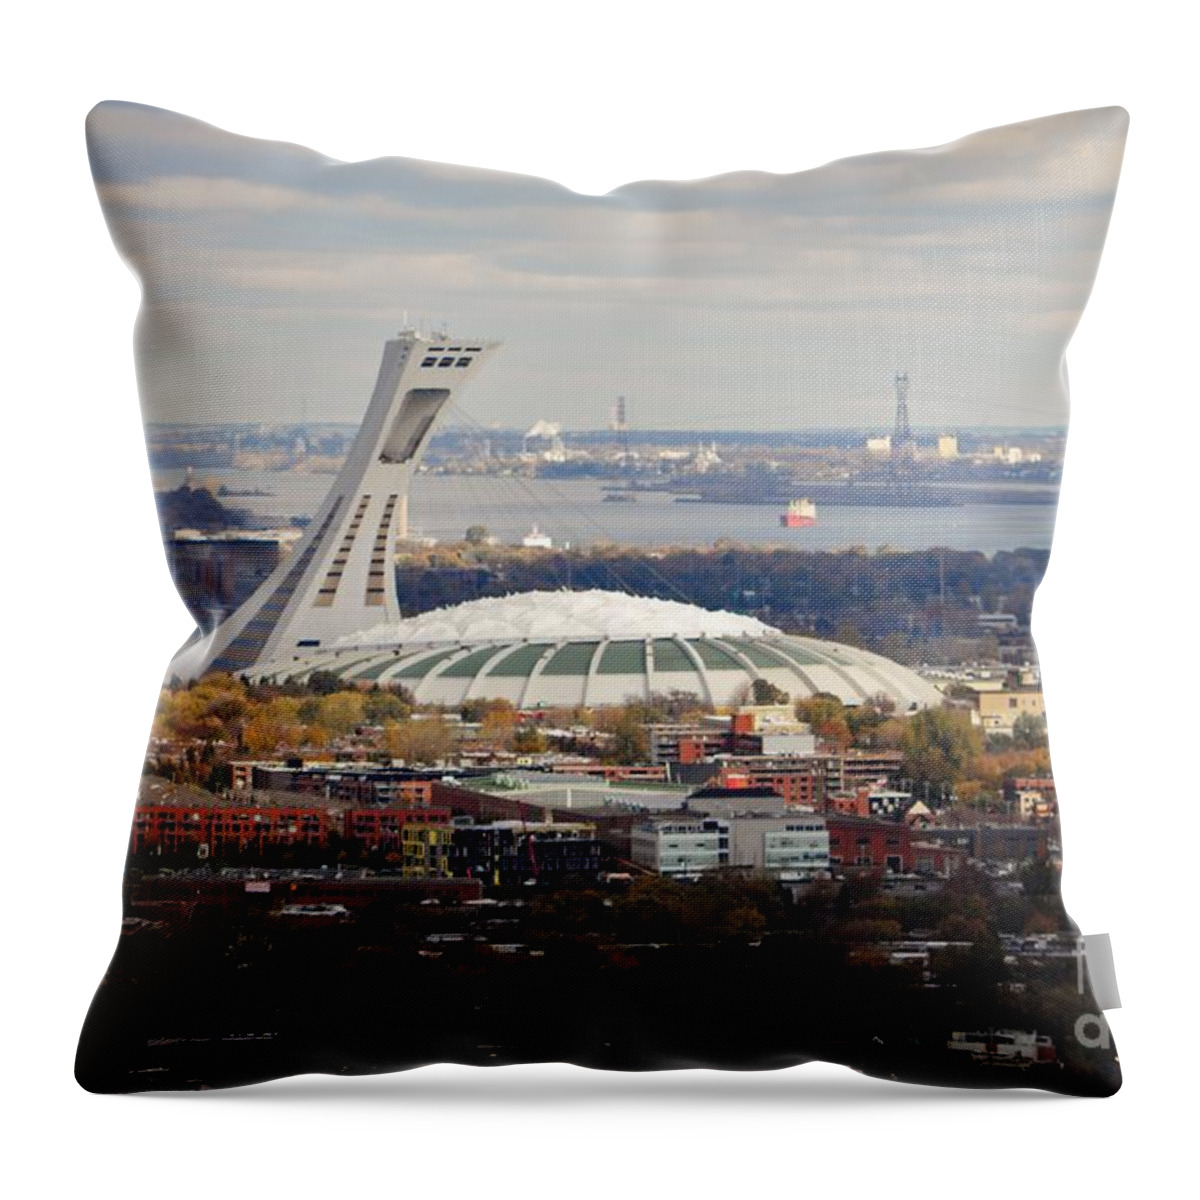 Olympic Stadium Throw Pillow featuring the painting Olympic Stadium by Reb Frost